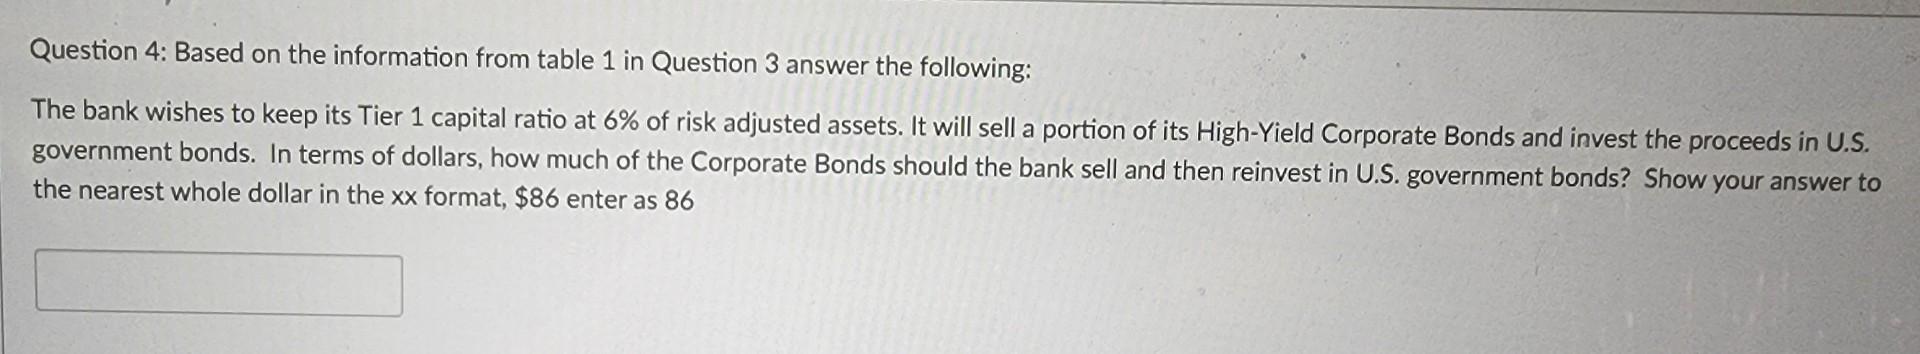 Question 4: Based on the information from table 1 in Question 3 answer the following: The bank wishes to keep its Tier 1 capi